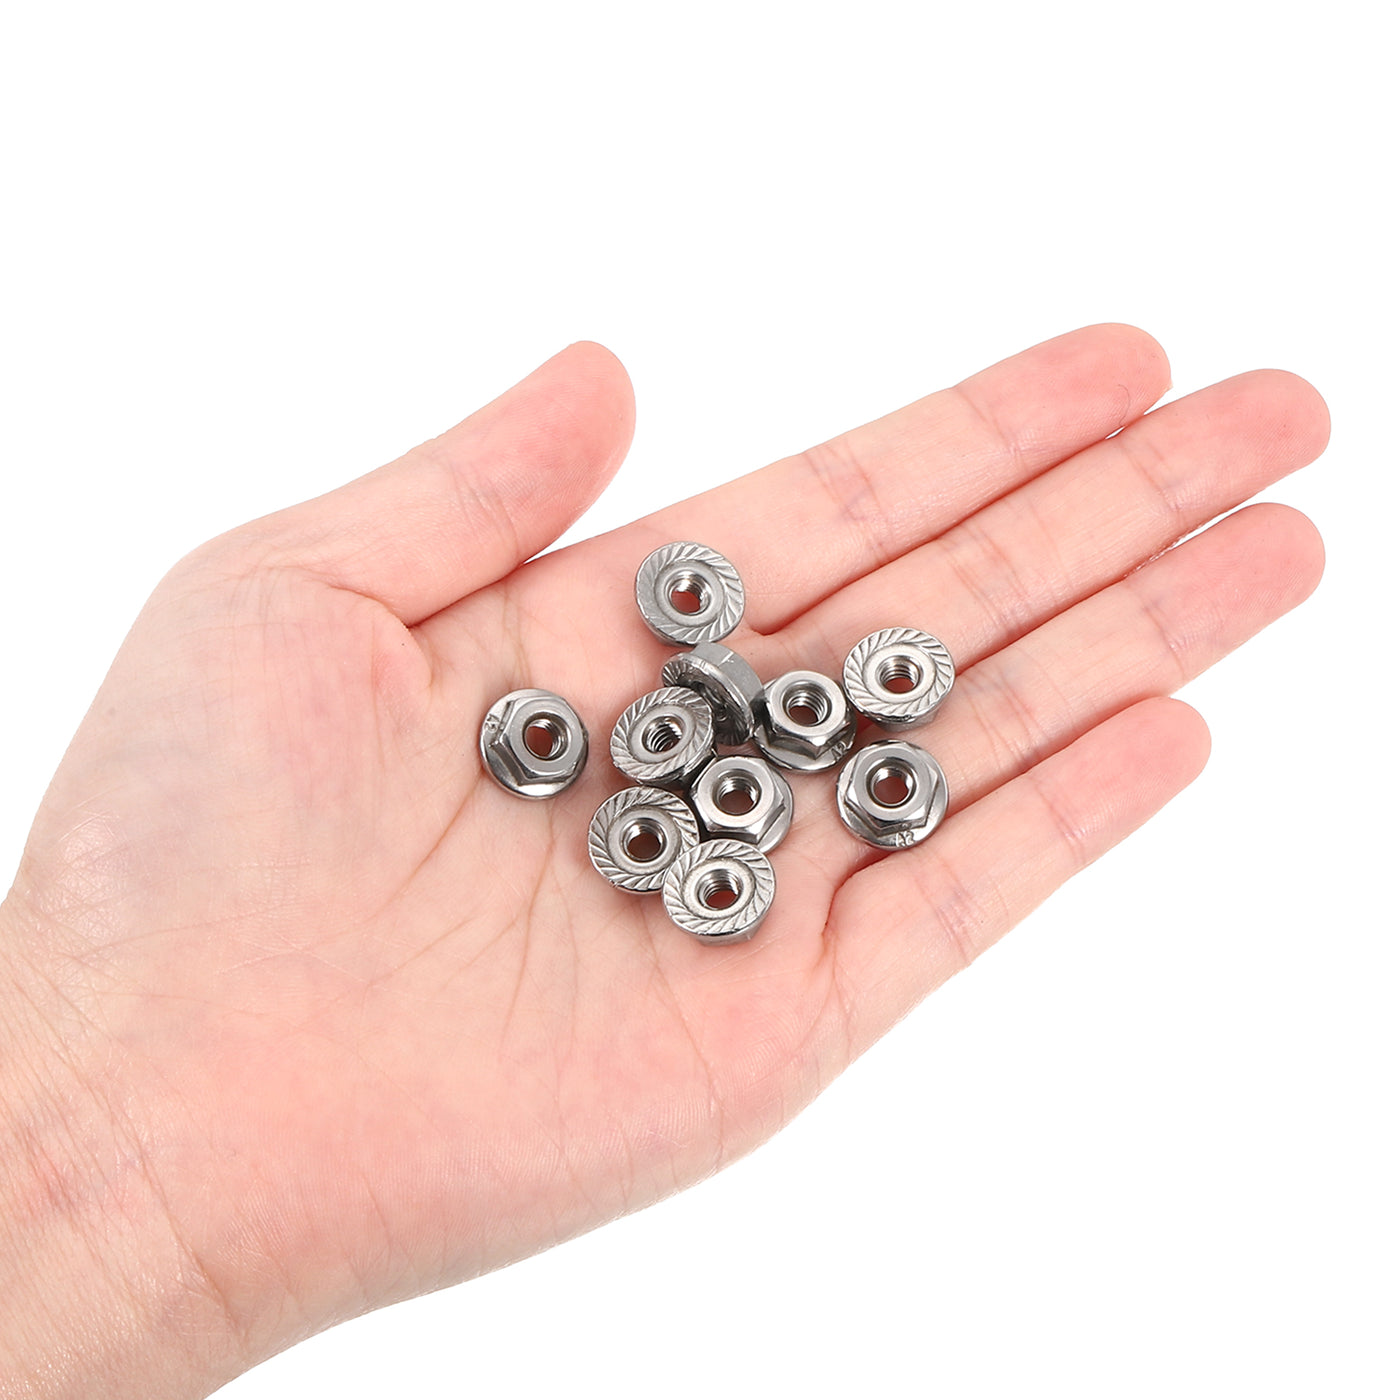 uxcell Uxcell 3/8-16 Serrated Flange Hex Lock Nuts, 25Pcs Hexagon Flange Nut, Silver